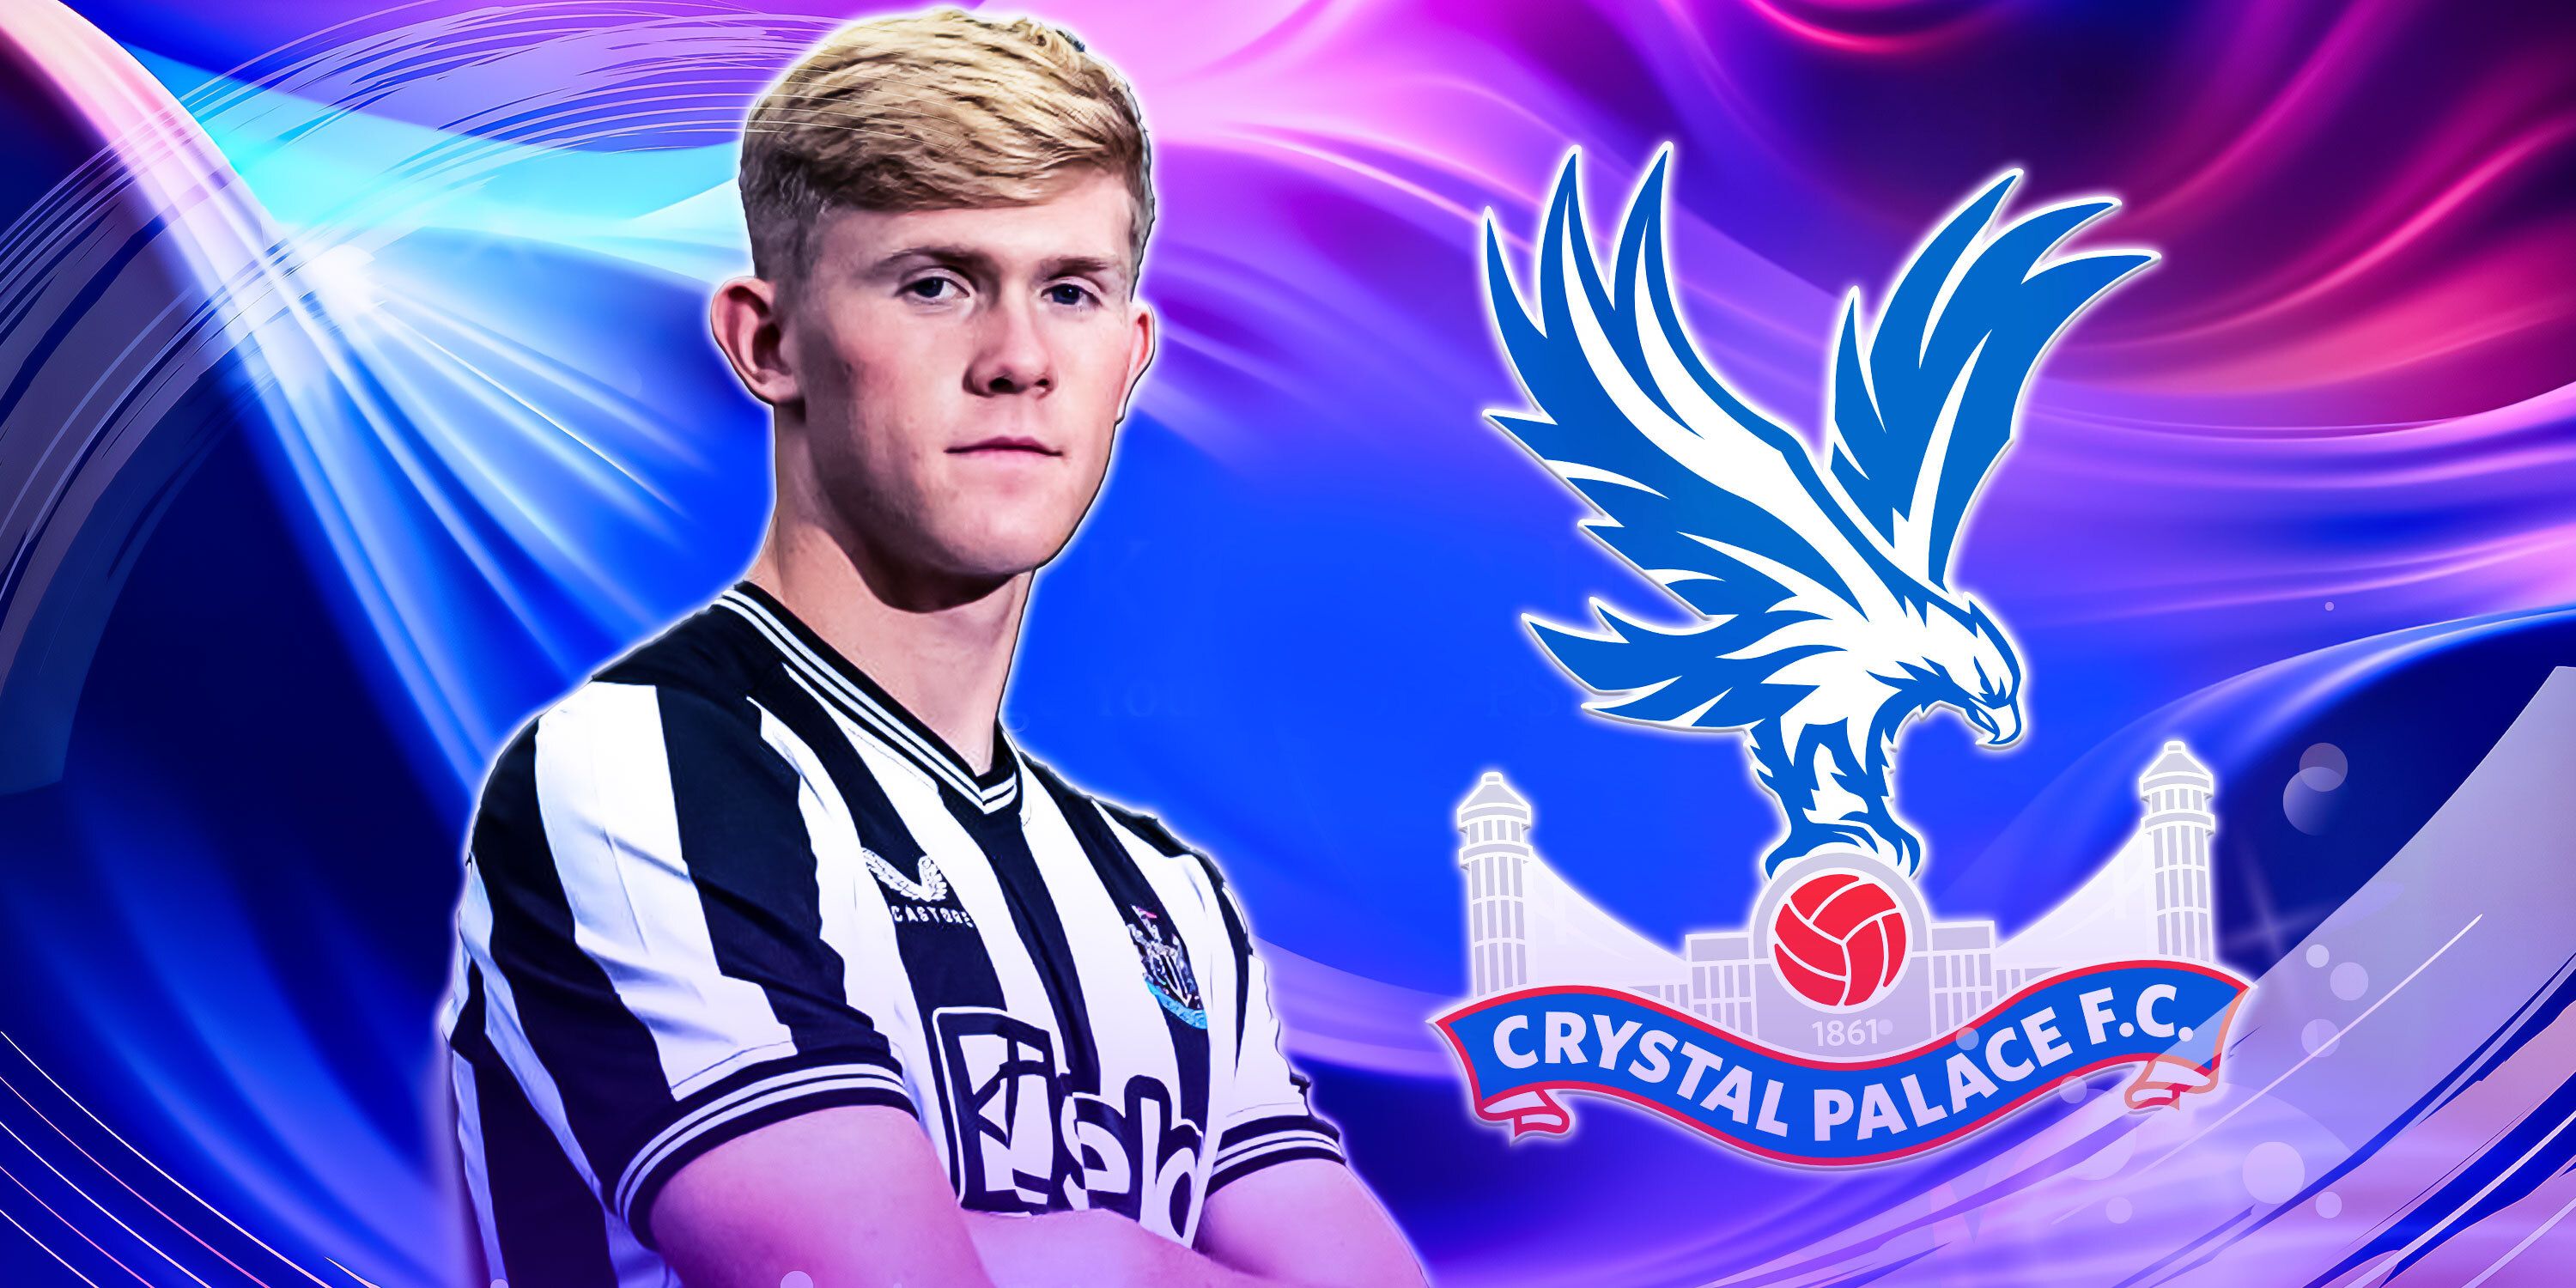 Newcastle United left-back Lewis Hall and the Crystal Palace badge